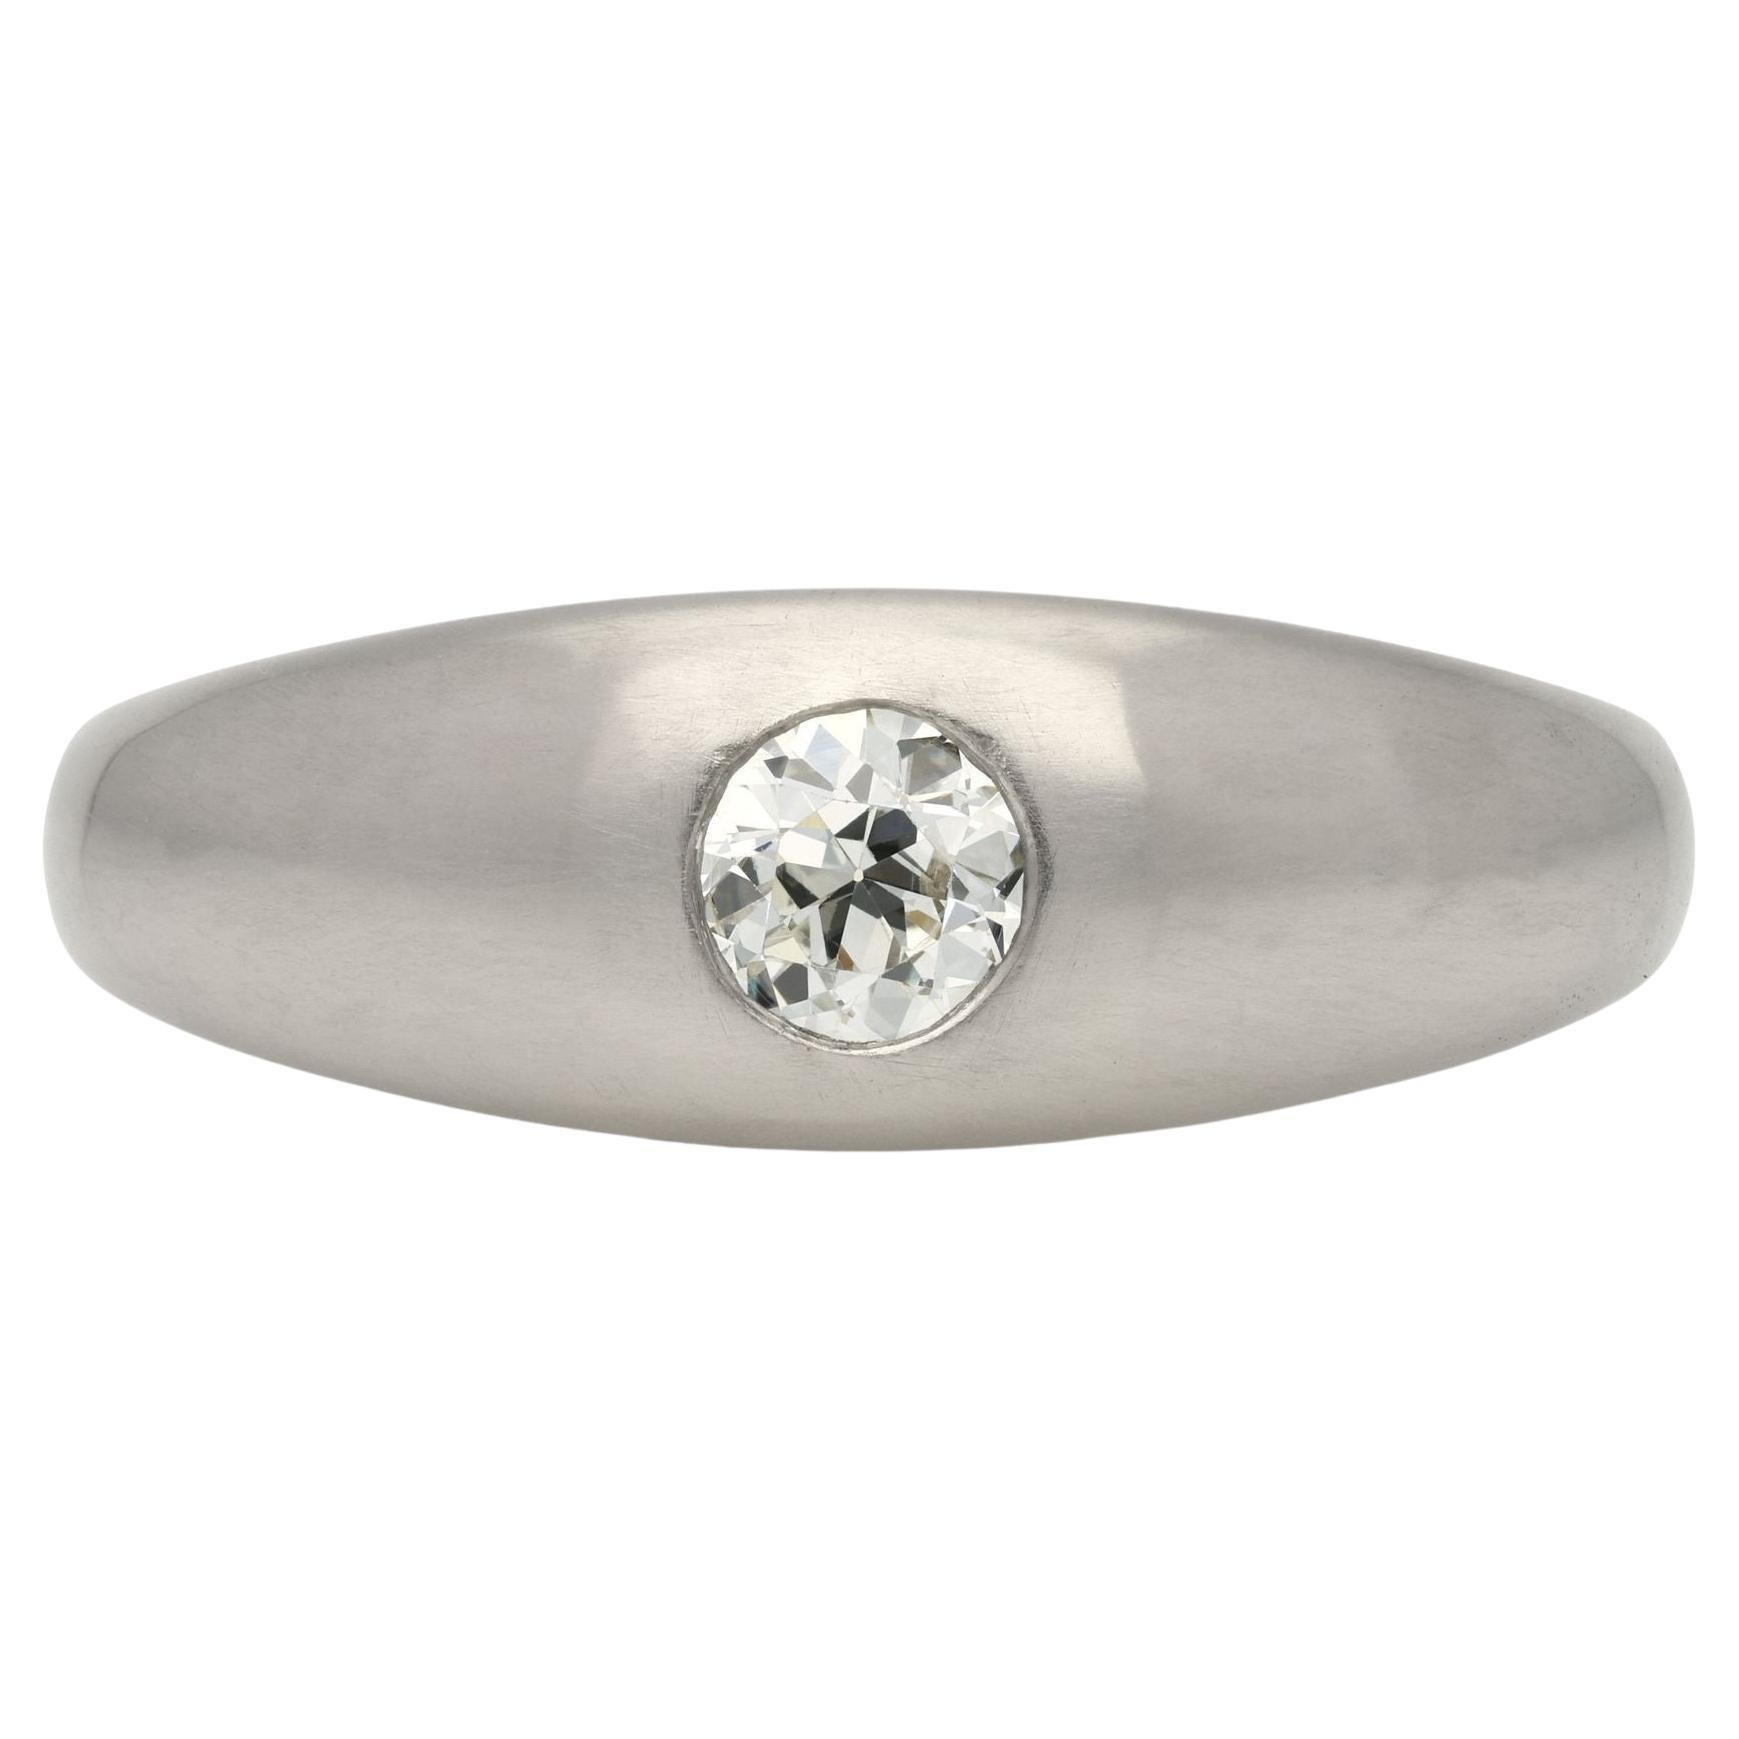 Hancocks Contemporary 0.45ct Old European Cut Diamond Band Ring in Platinum For Sale